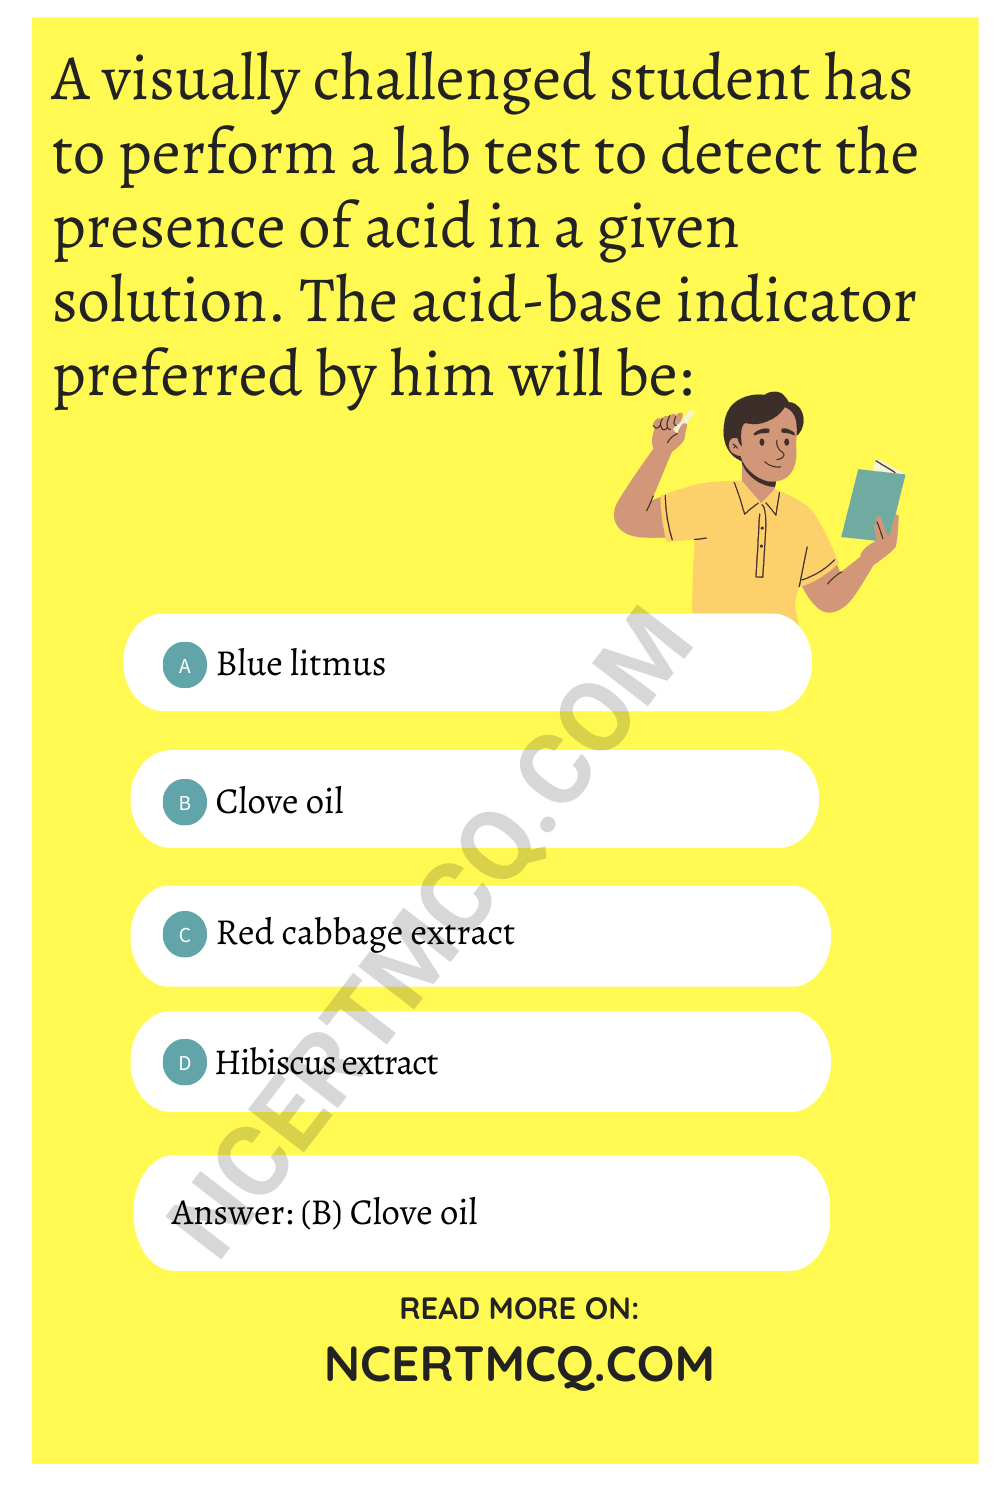 A visually challenged student has to perform a lab test to detect the presence of acid in a given solution. The acid-base indicator preferred by him will be: